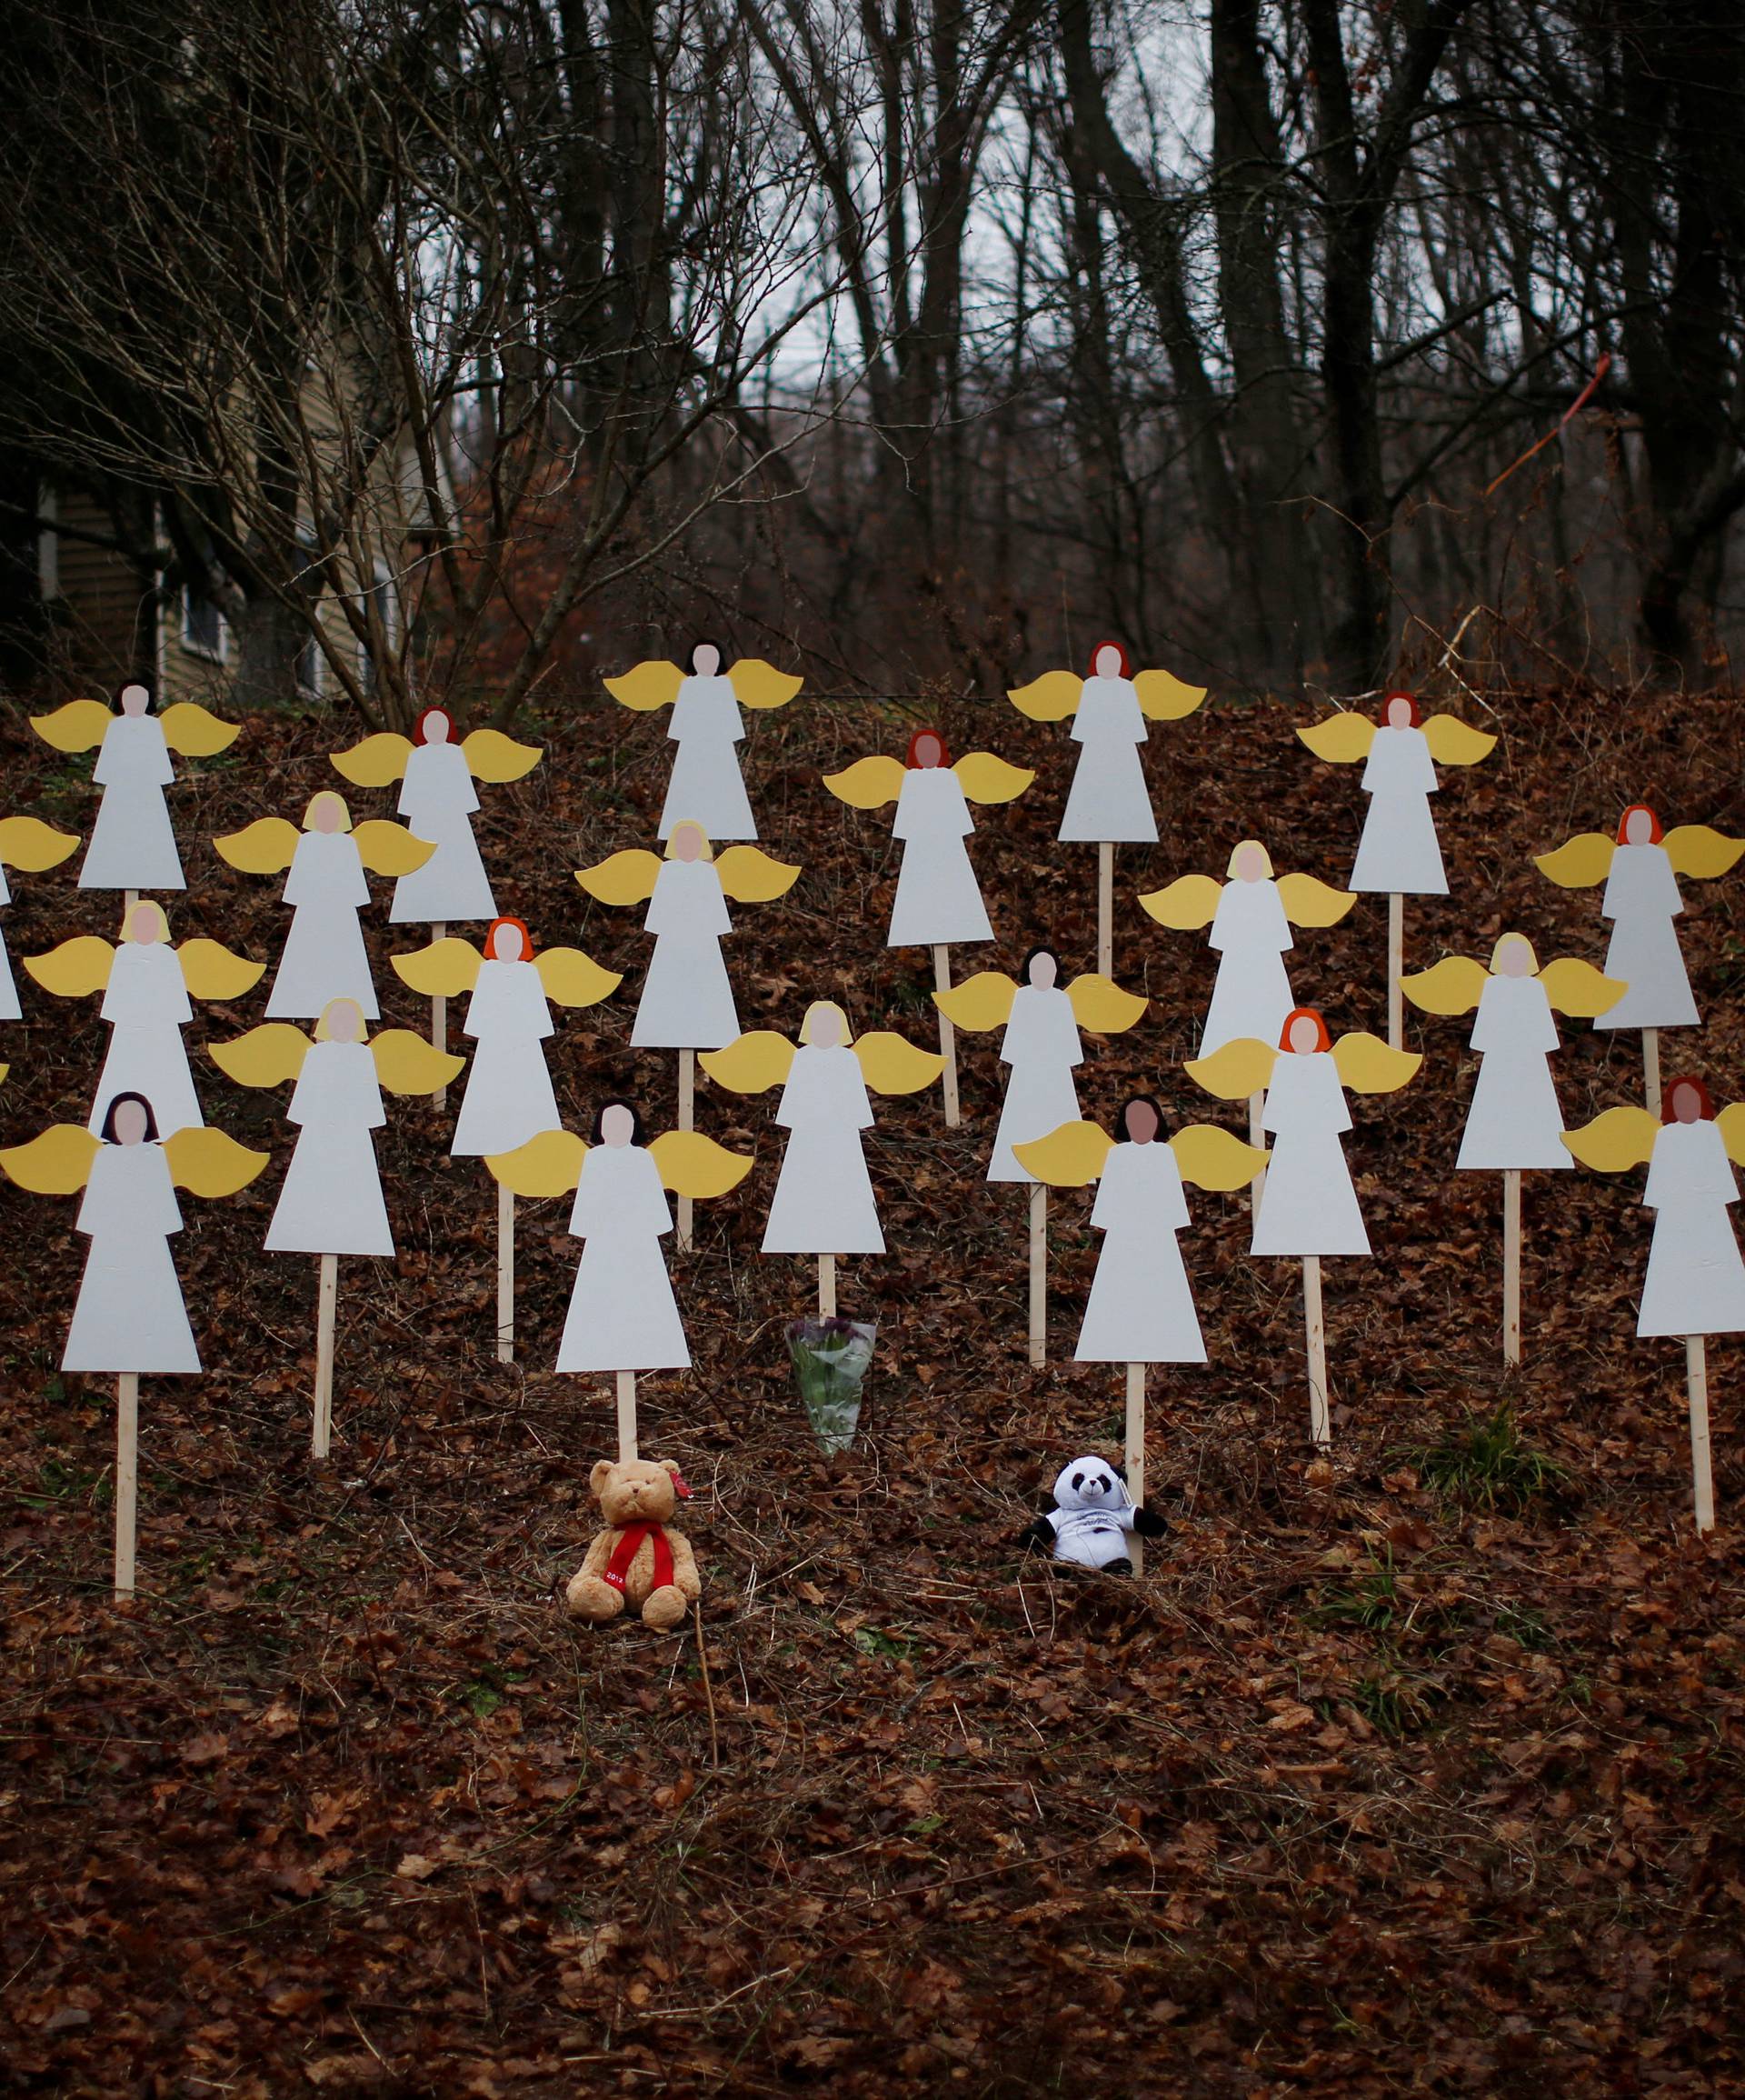 FILE PHOTO: Twenty-seven wooden angel figures are seen placed in wooded area beside road near Sandy Hook Elementary School for victims of school shooting in Newtown